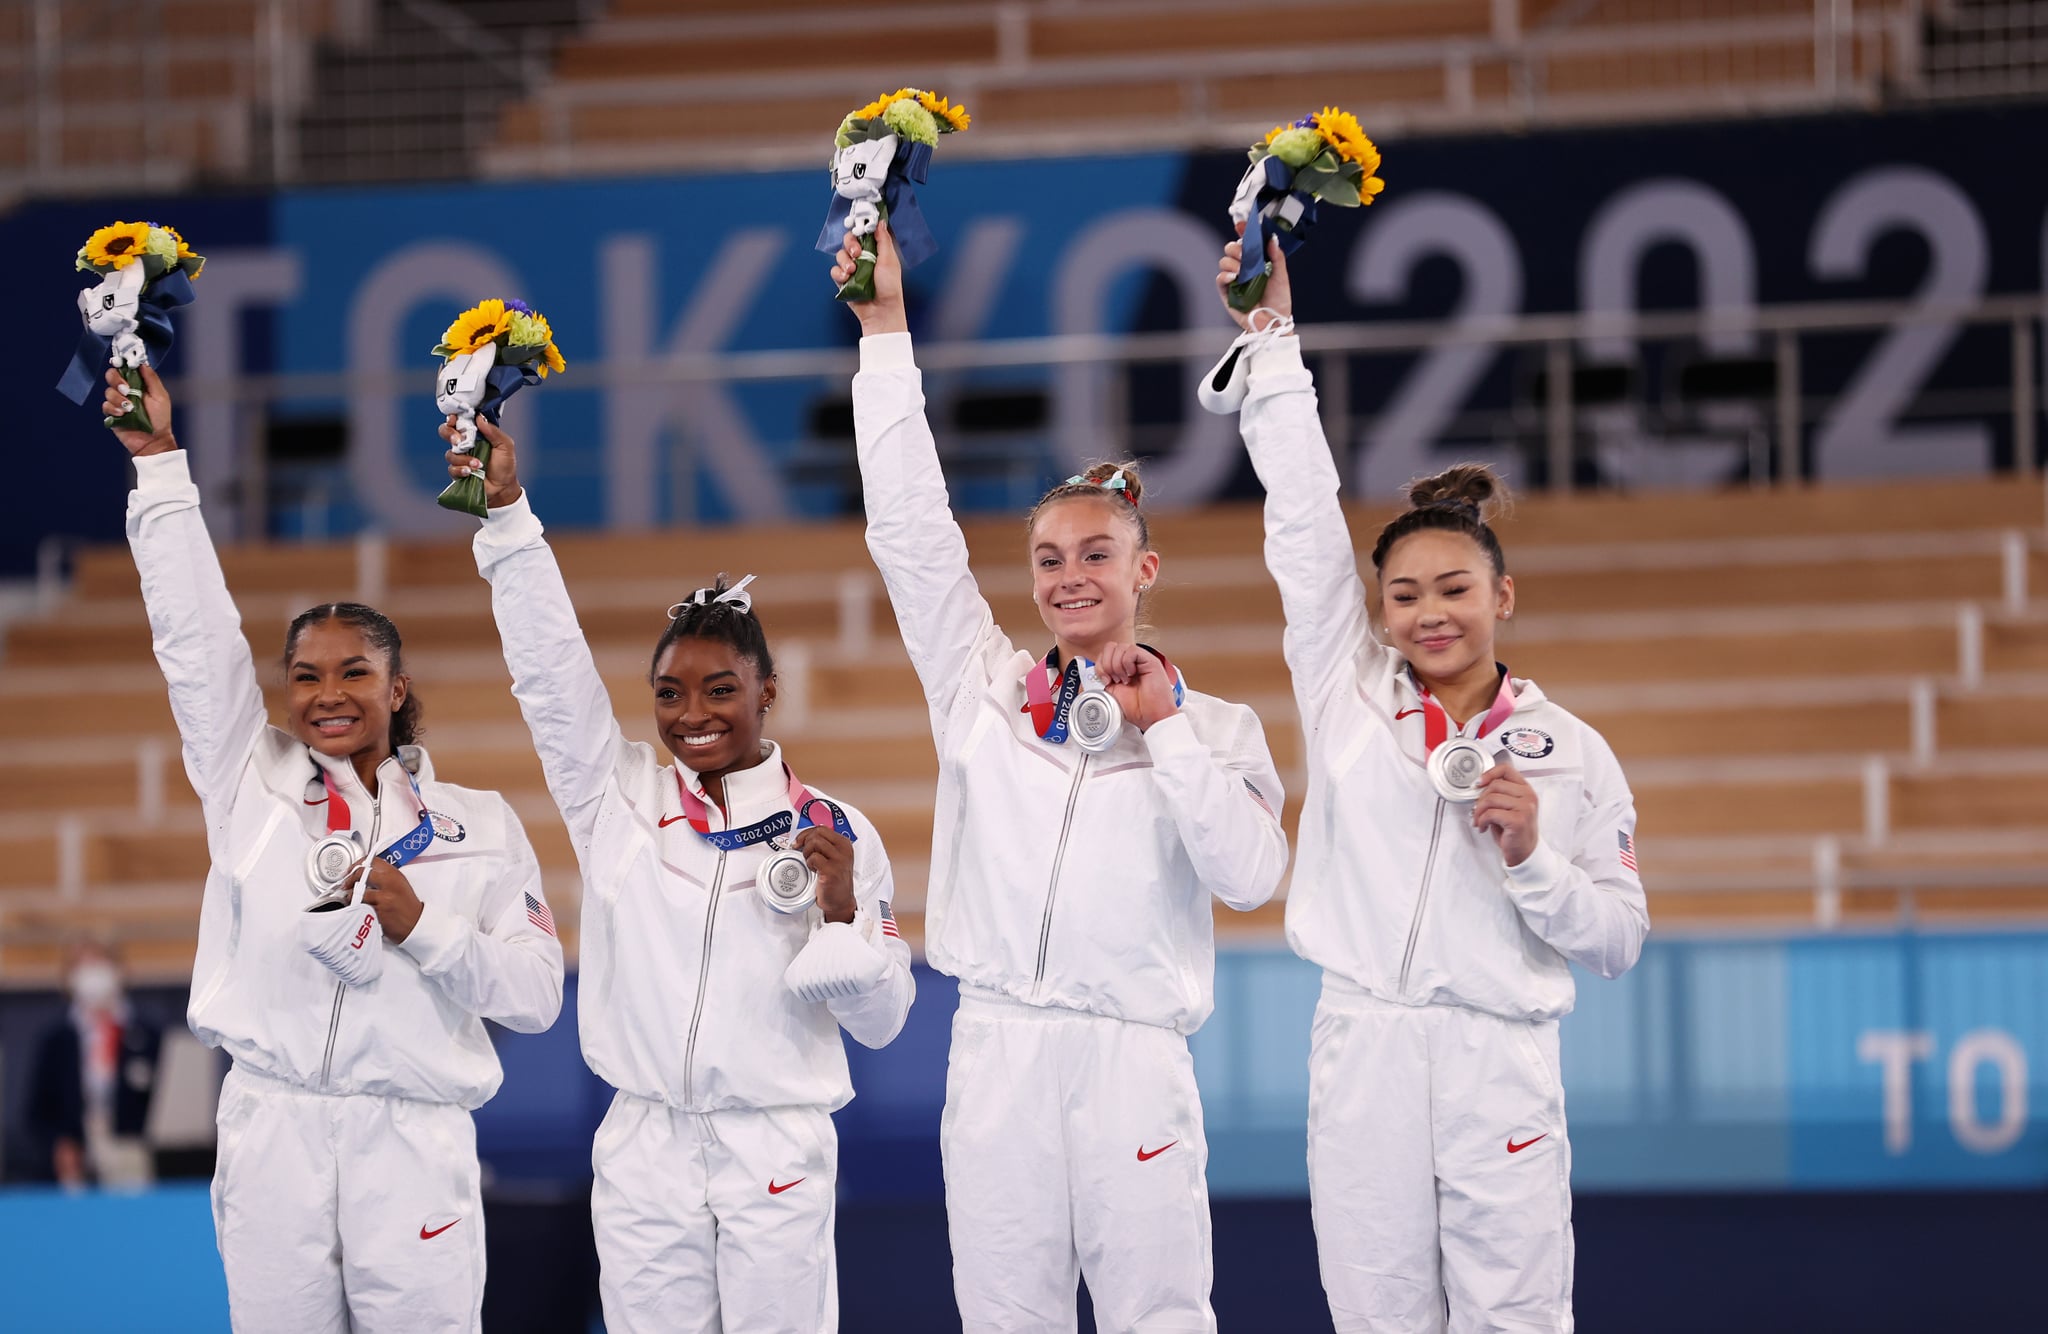 TOKYO, JAPAN - JULY 27: Jordan Chiles, Simone Biles, Grace McCallum and Sunisa Lee of Team United States react on the podium after winning the silver medal during the Women's Team Final on day four of the Tokyo 2020 Olympic Games at Ariake Gymnastics Centre on July 27, 2021 in Tokyo, Japan. (Photo by Laurence Griffiths/Getty Images)